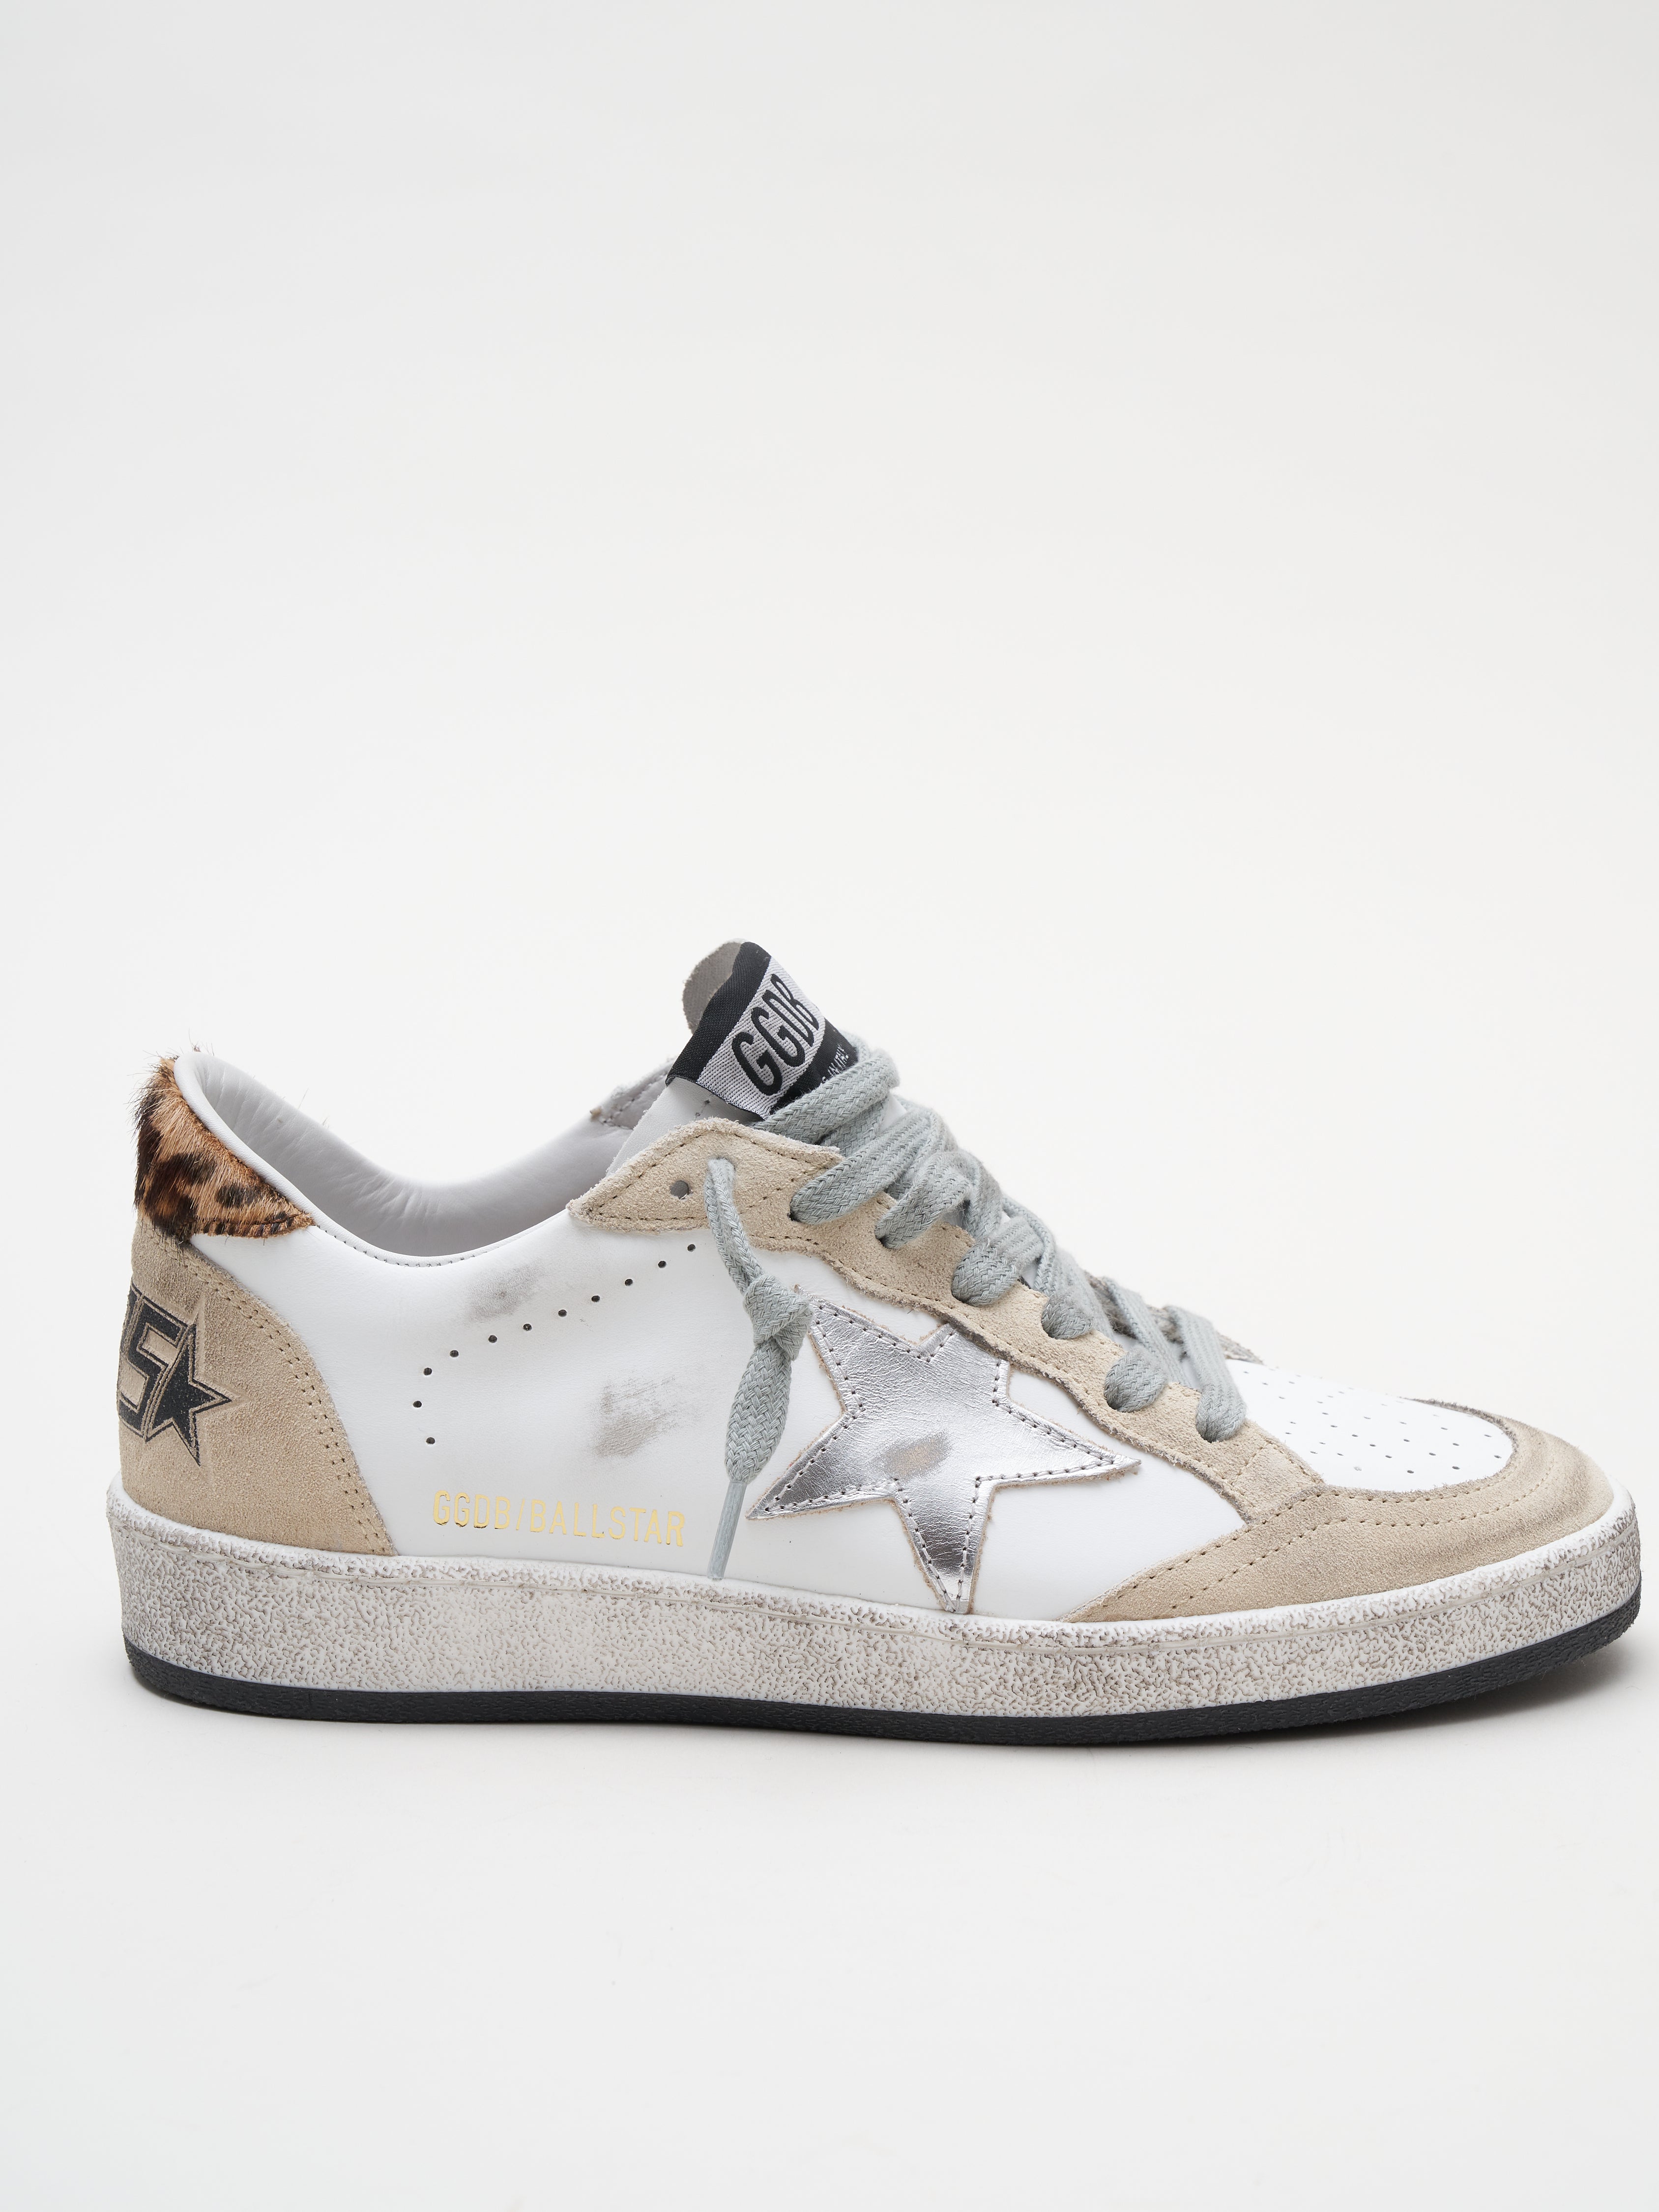 golden goose with pearls